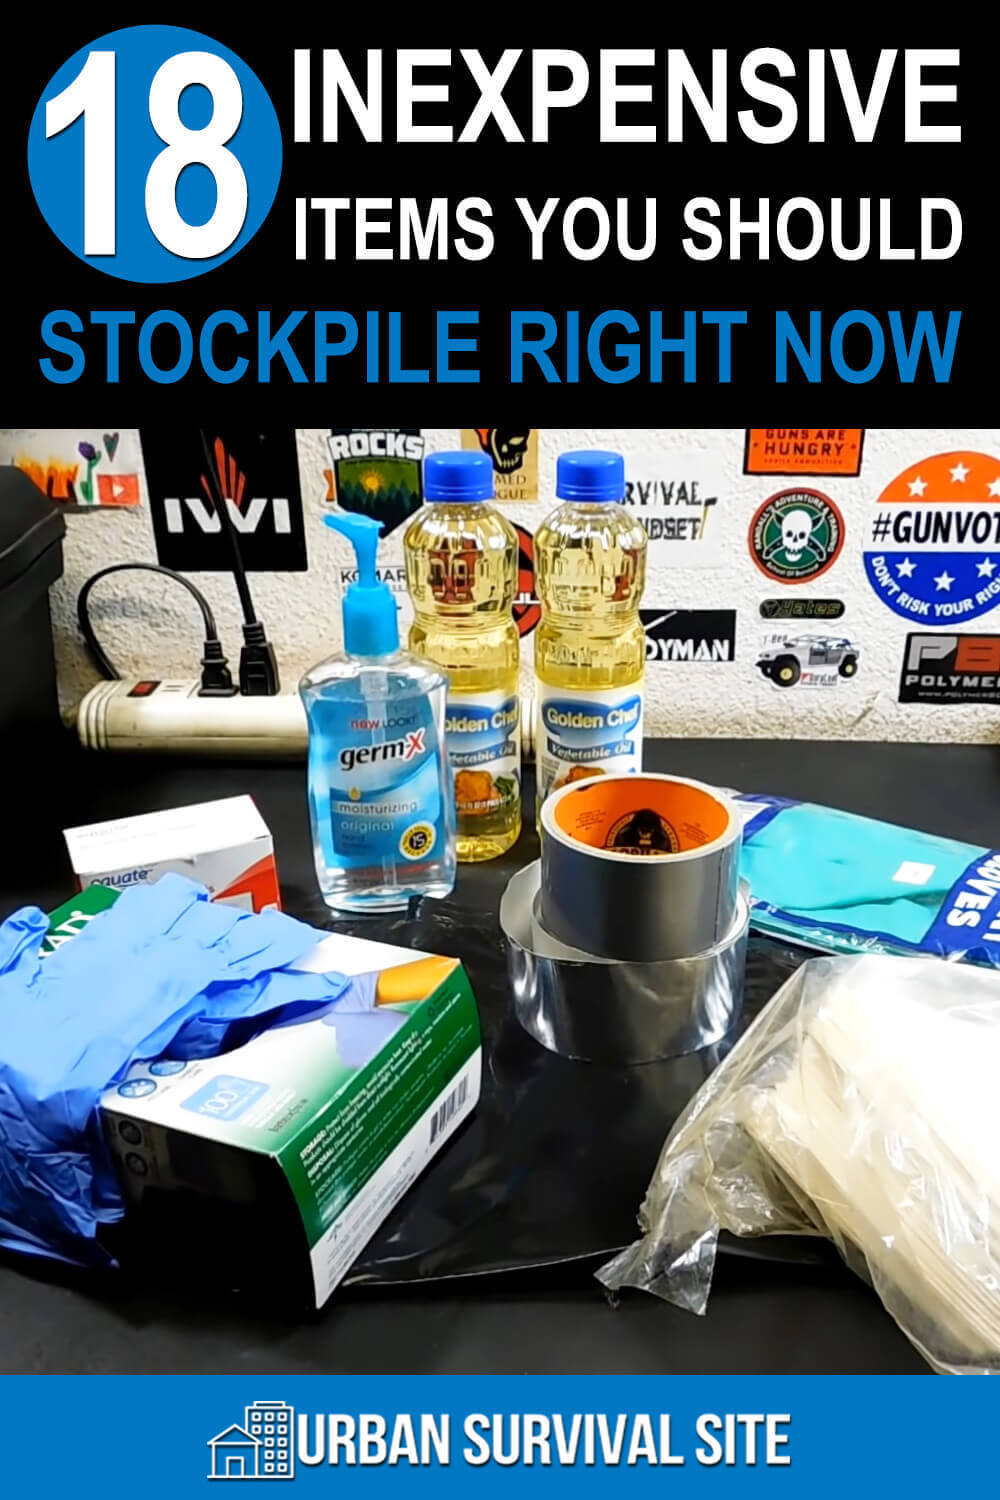 18 Inexpensive Items You Should Stockpile Right Now